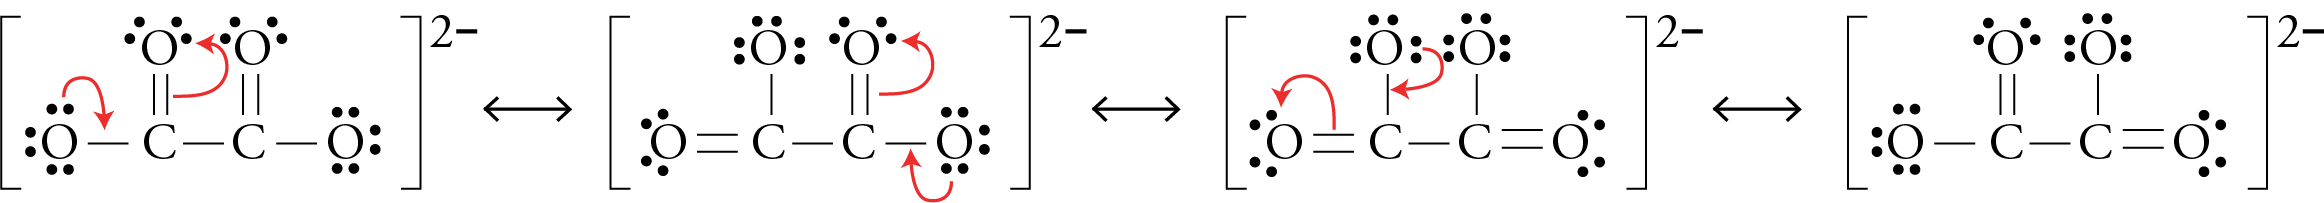 Image showing all four resonance structures of the oxalate ion